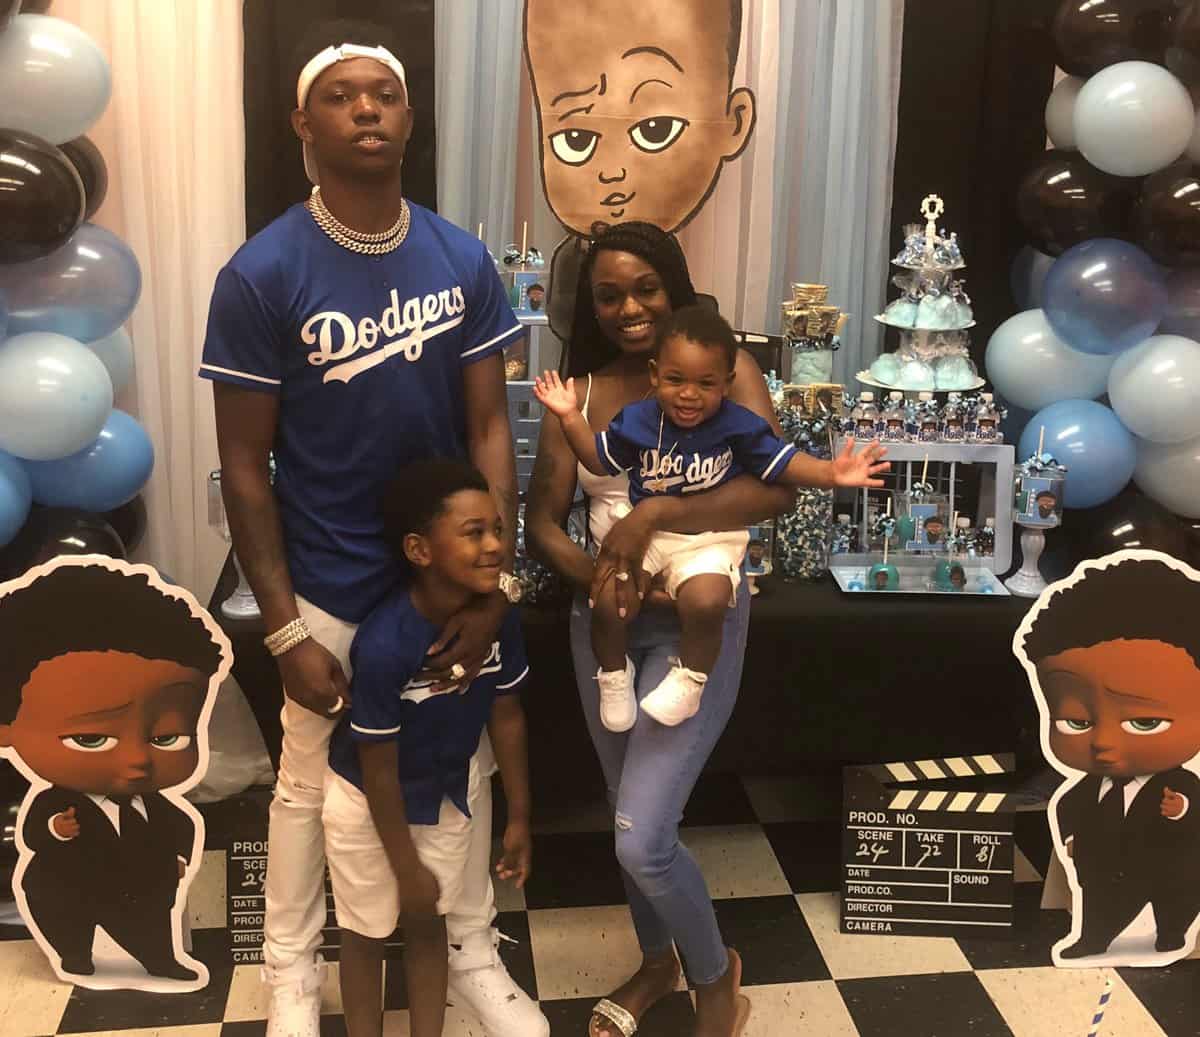 Image of Yung Bleu and Tiemeria with their kids